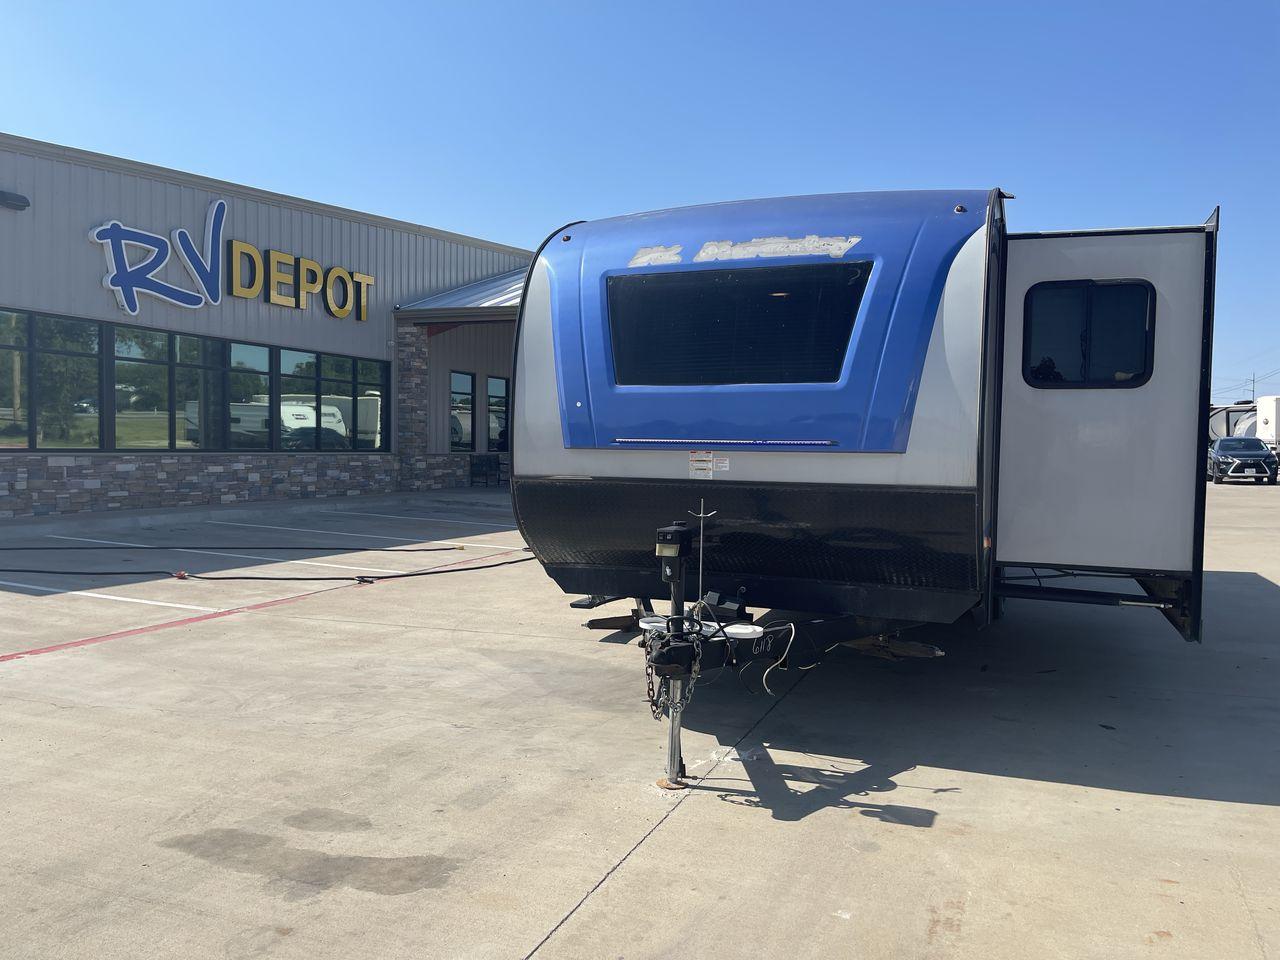 2018 GRAY RIVERSIDE MT MCKINLEY 830FK - (59CCC3223JL) , Length: 32 ft | Dry Weight: 5660 lbs | Slides: 1 transmission, located at 4319 N Main St, Cleburne, TX, 76033, (817) 678-5133, 32.385960, -97.391212 - With so much floor space to spare, the Riverside RV 830FK Mt. McKinley single slide travel trailer is the perfect way to start your next camping trip. This unit measures 32 ft in length, 8 ft in width, and 10.5 ft in height. It has a dry weight of 5,660 lbs., with a cargo capacity of 1,975 lbs., - Photo #0